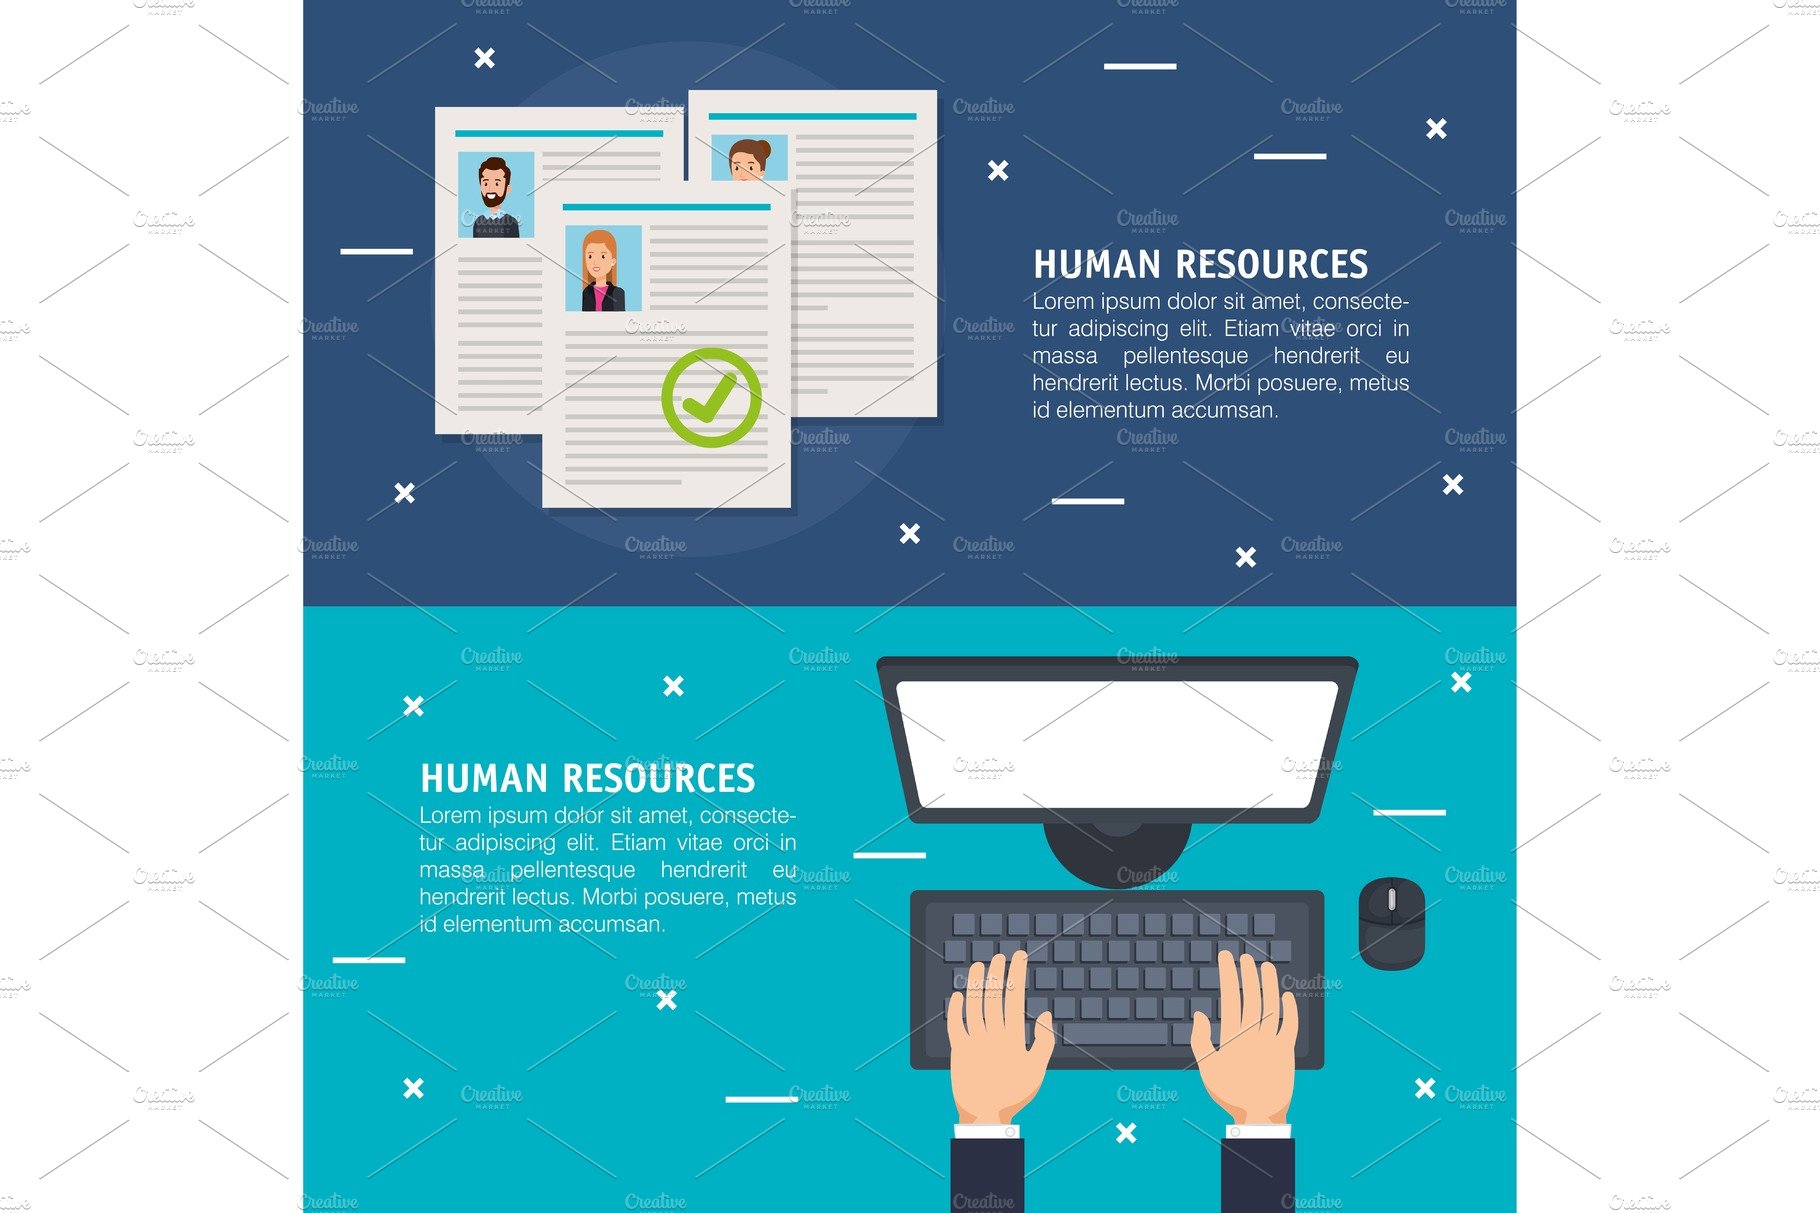 human resources set icons cover image.